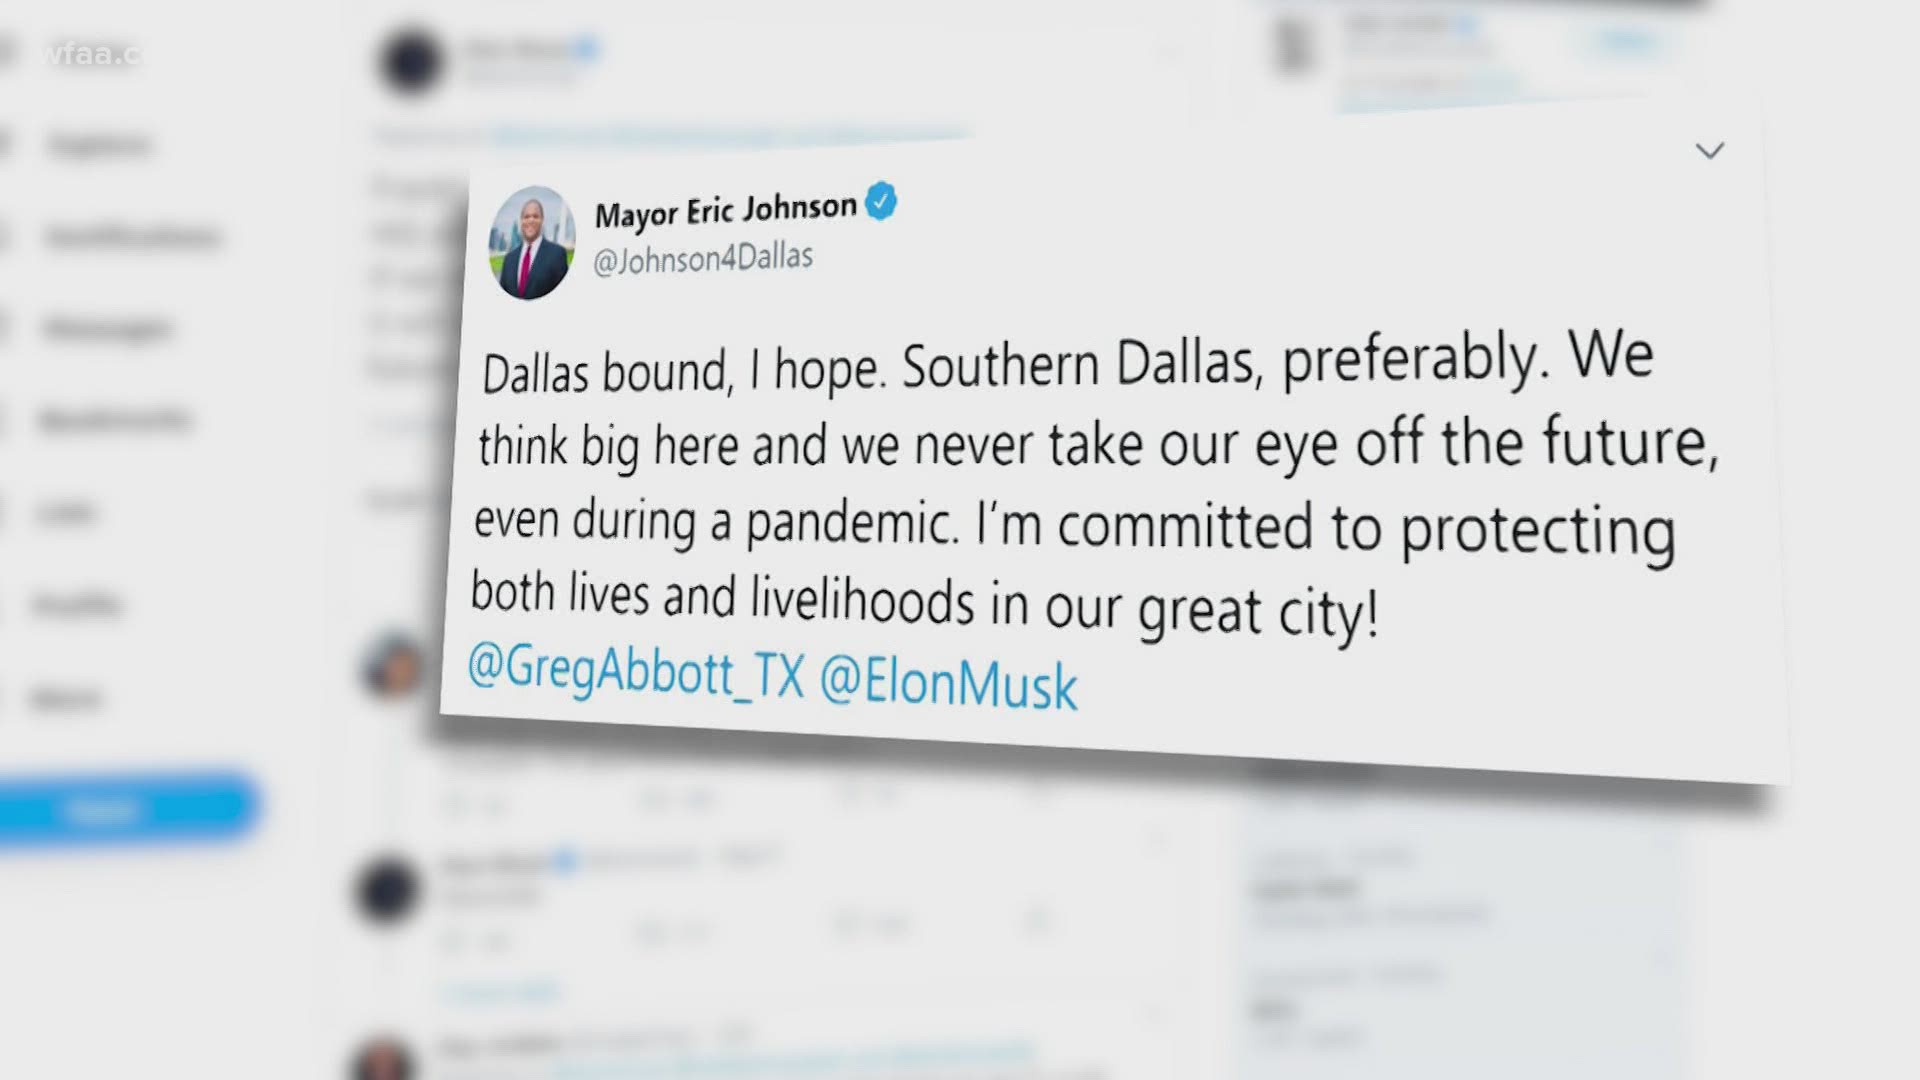 Tesla CEO Elon Musk said on Twitter that he is looking at moving the company’s headquarters and future programs to “Texas/Nevada immediately."